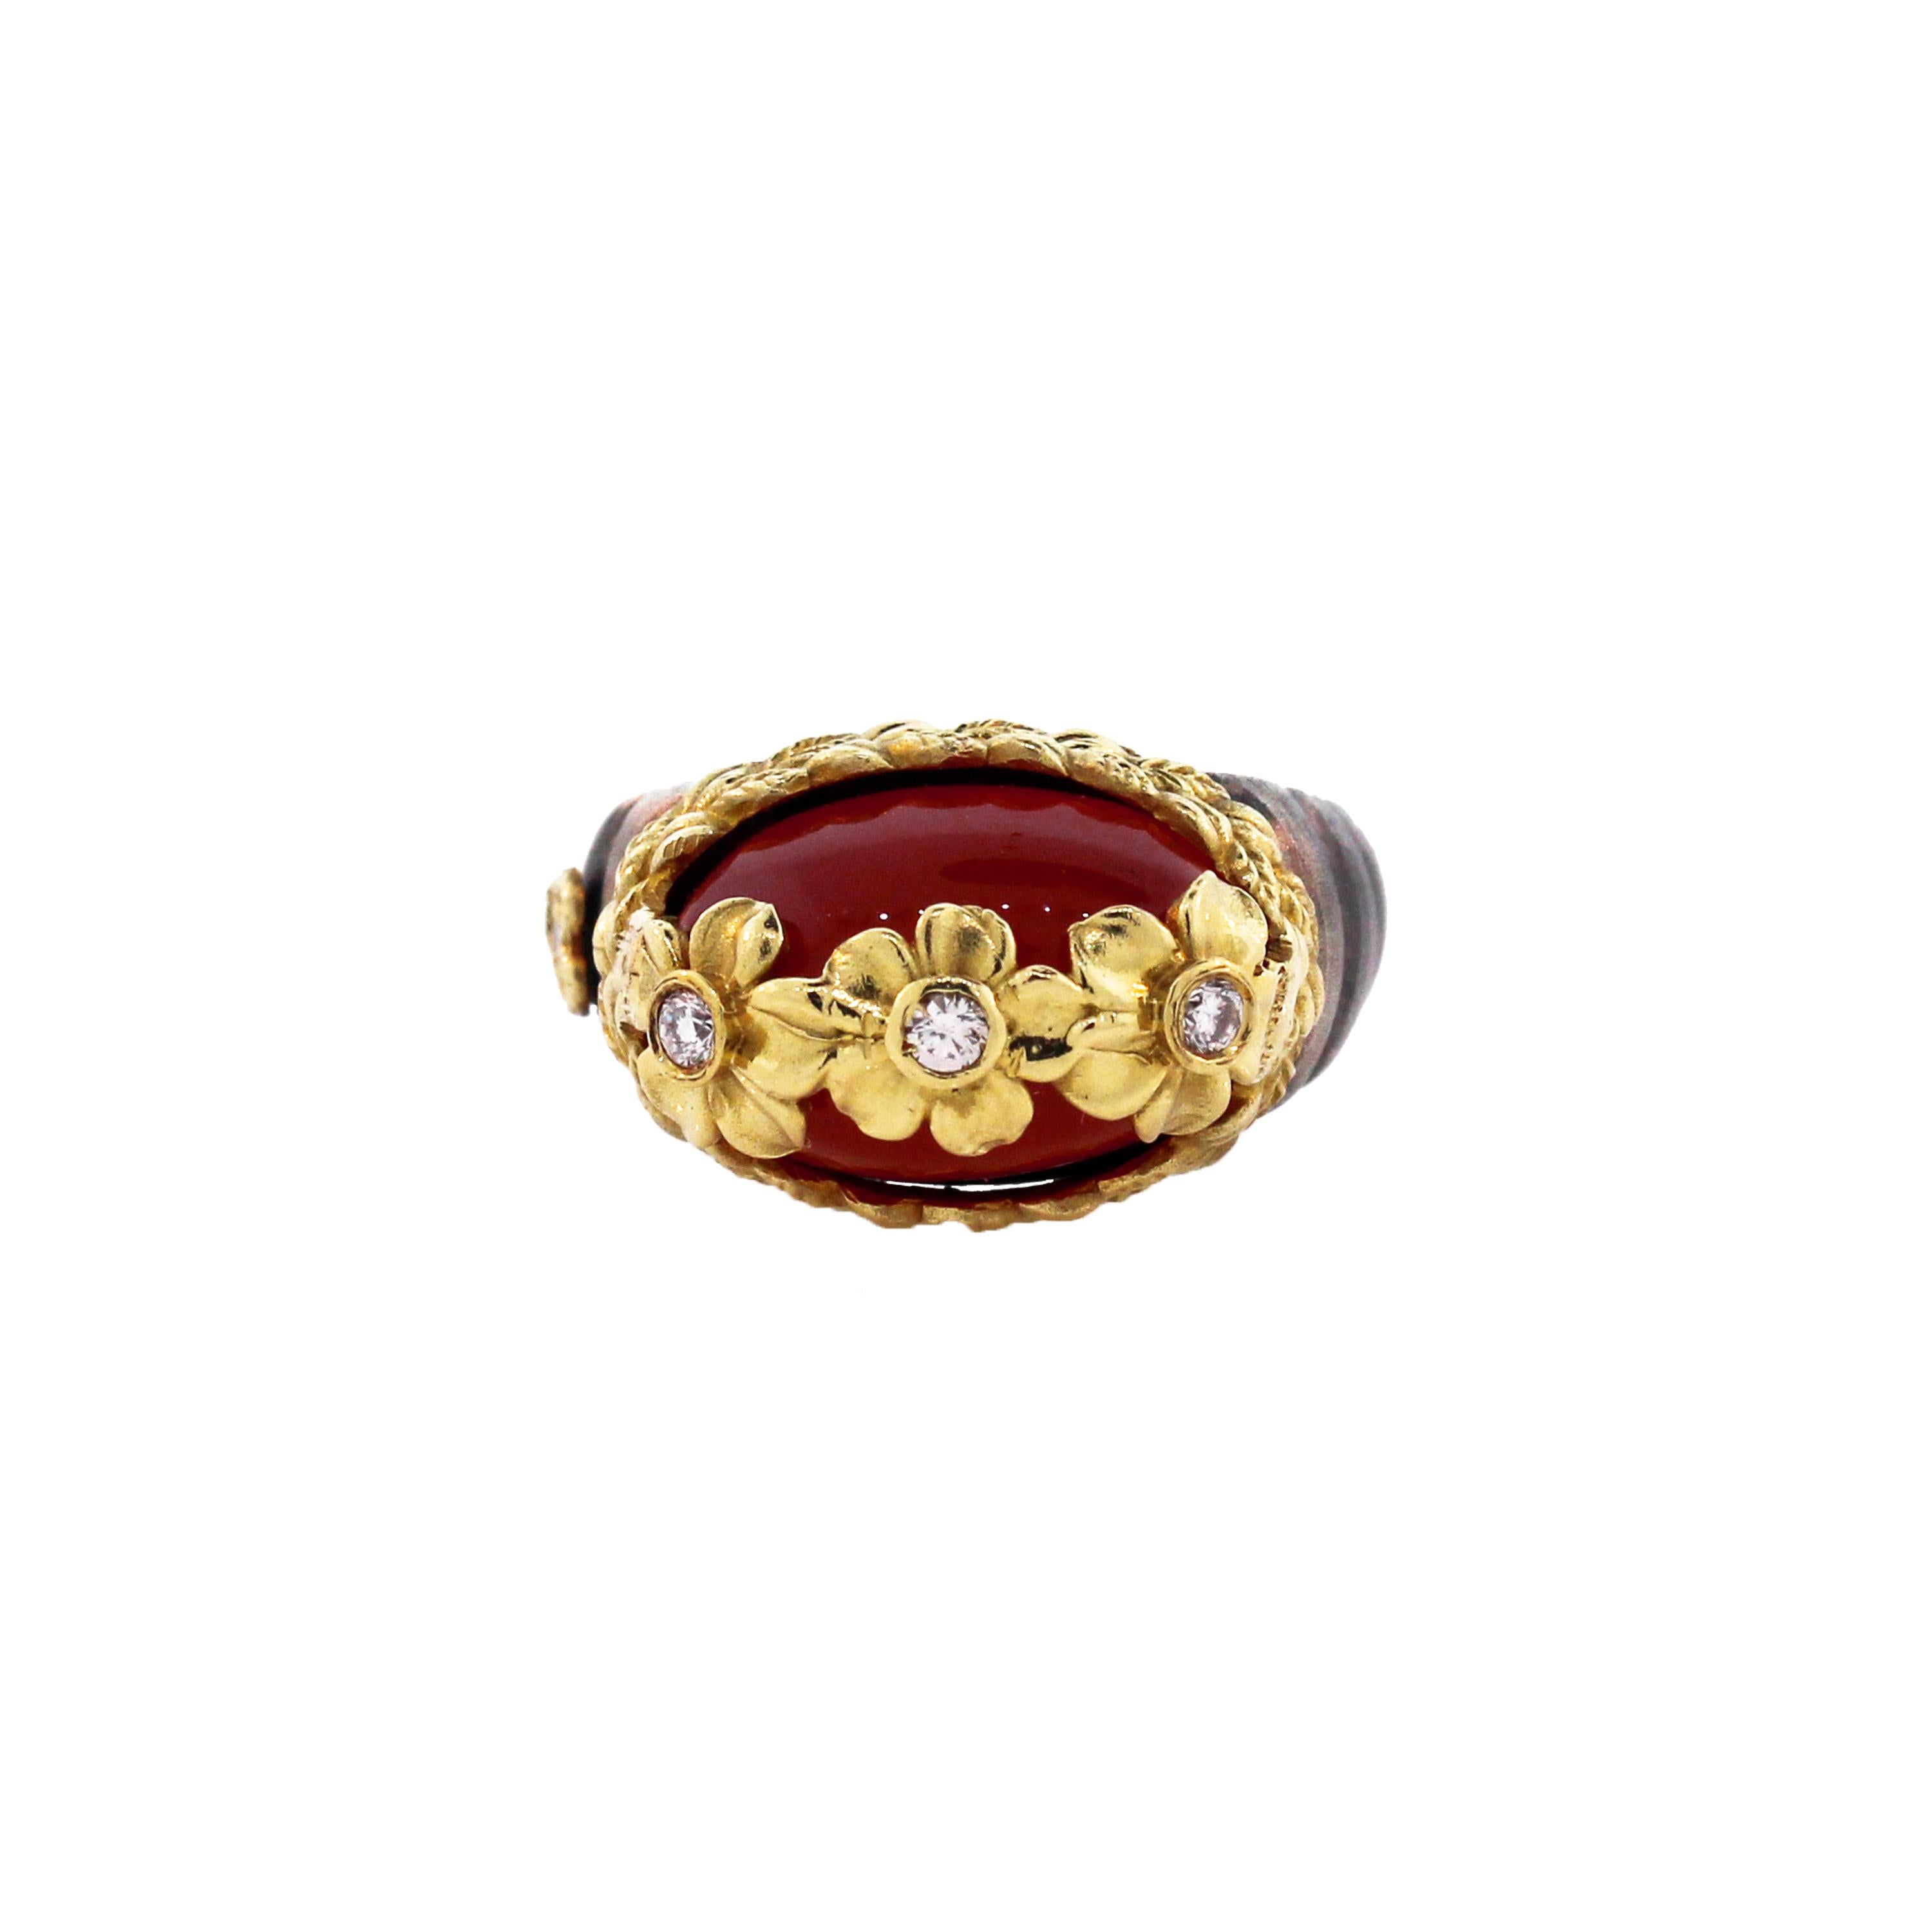 IF YOU ARE REALLY INTERESTED, CONTACT US WITH ANY REASONABLE OFFER. WE WILL TRY OUR BEST TO MAKE YOU HAPPY!

Aged Silver & 18K Gold Floral Ring with Diamonds and Carnelian Center by Stambolian

Center is Cabochon cut, oval Carnelian with floral